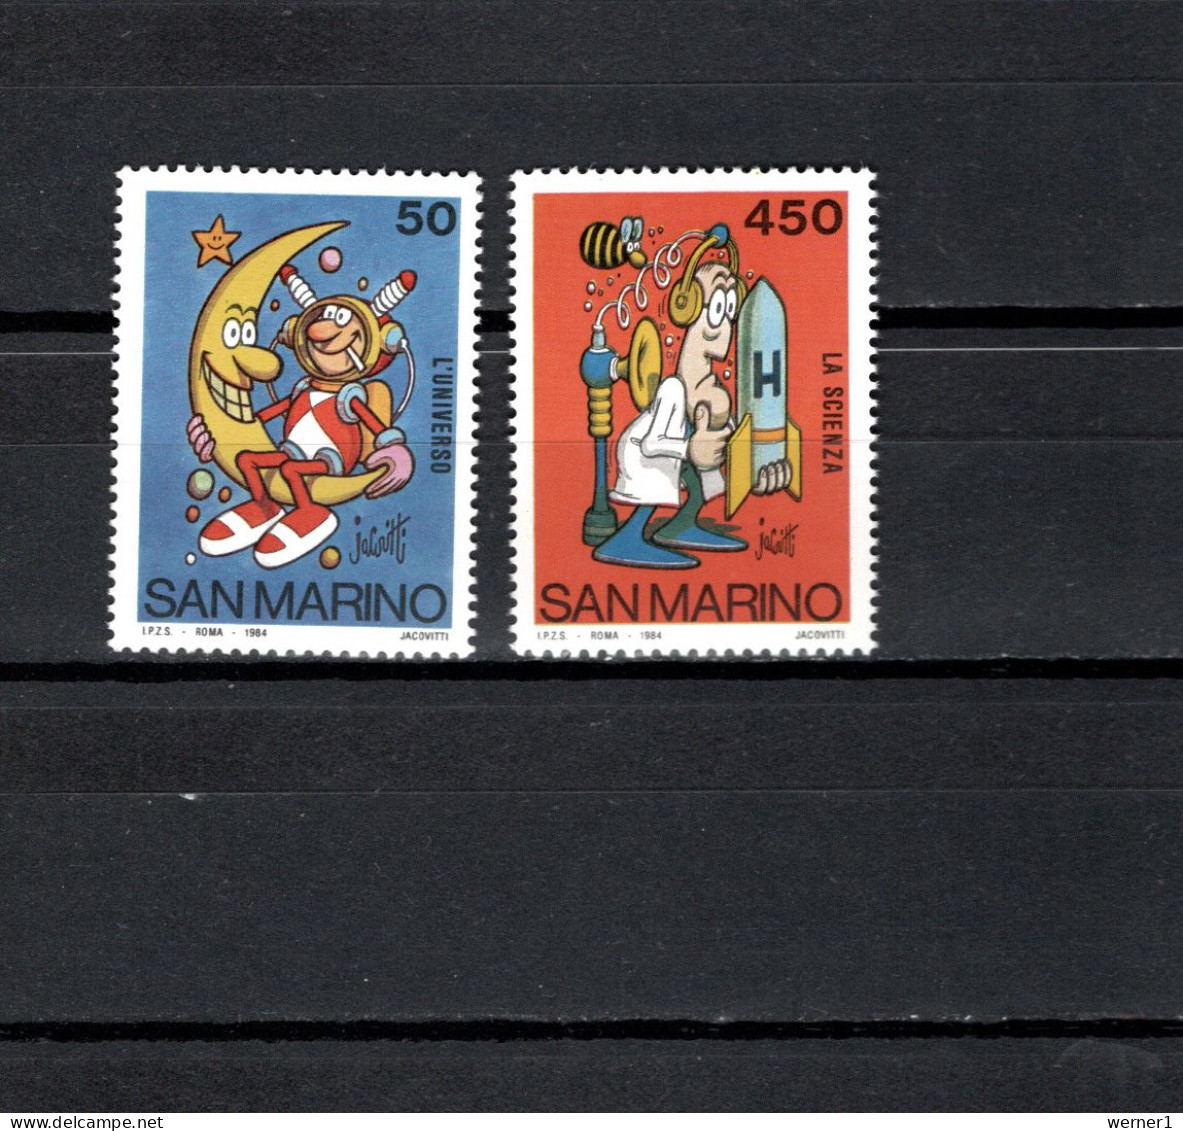 San Marino 1984 Space, Children And Philately 2 Stamps MNH - Europa